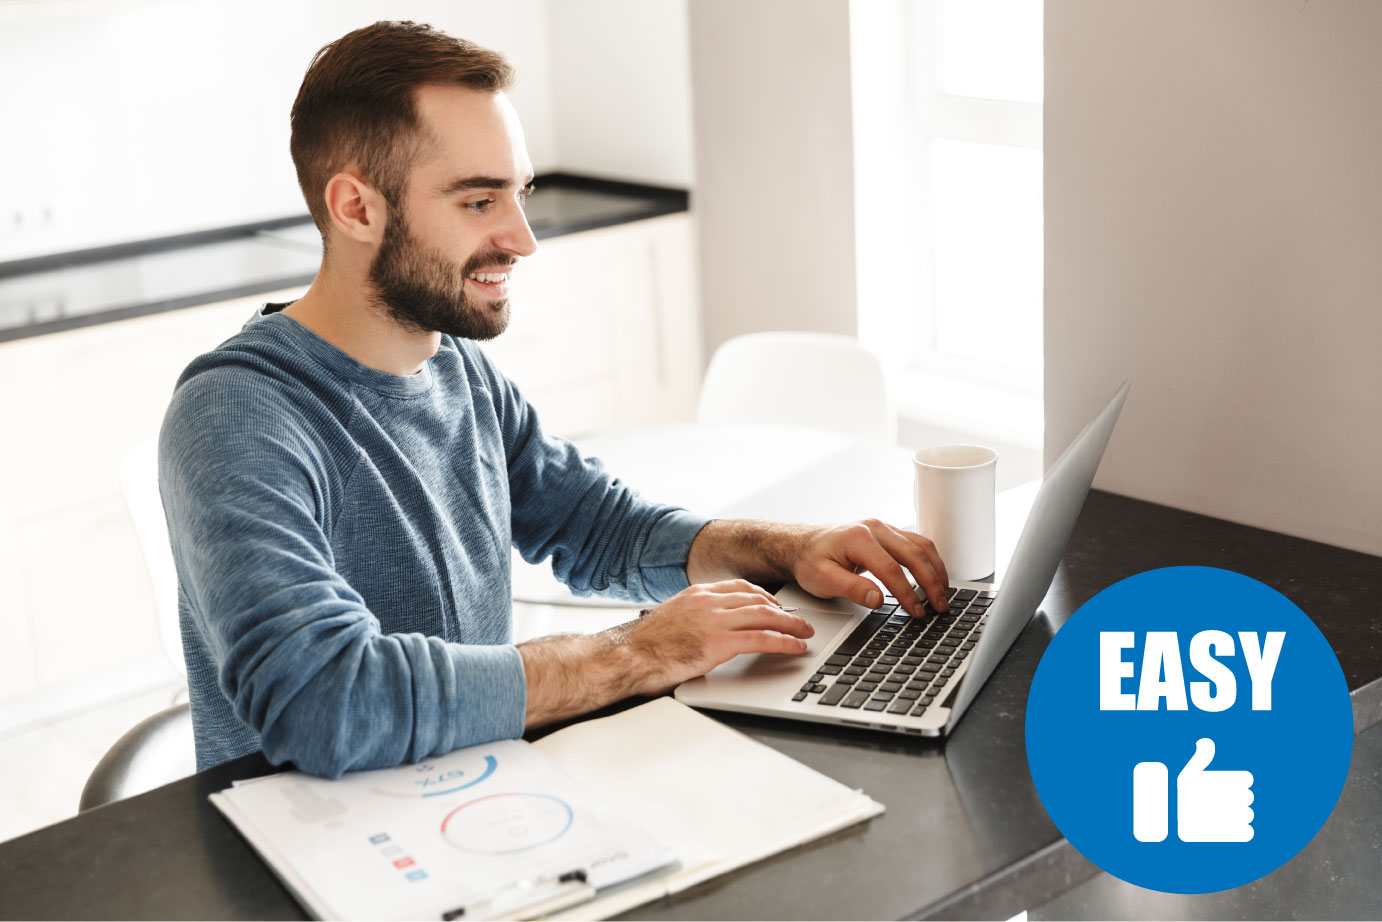 Man with beard browsing on computer and a blue round icon with easy and a thumbs up 